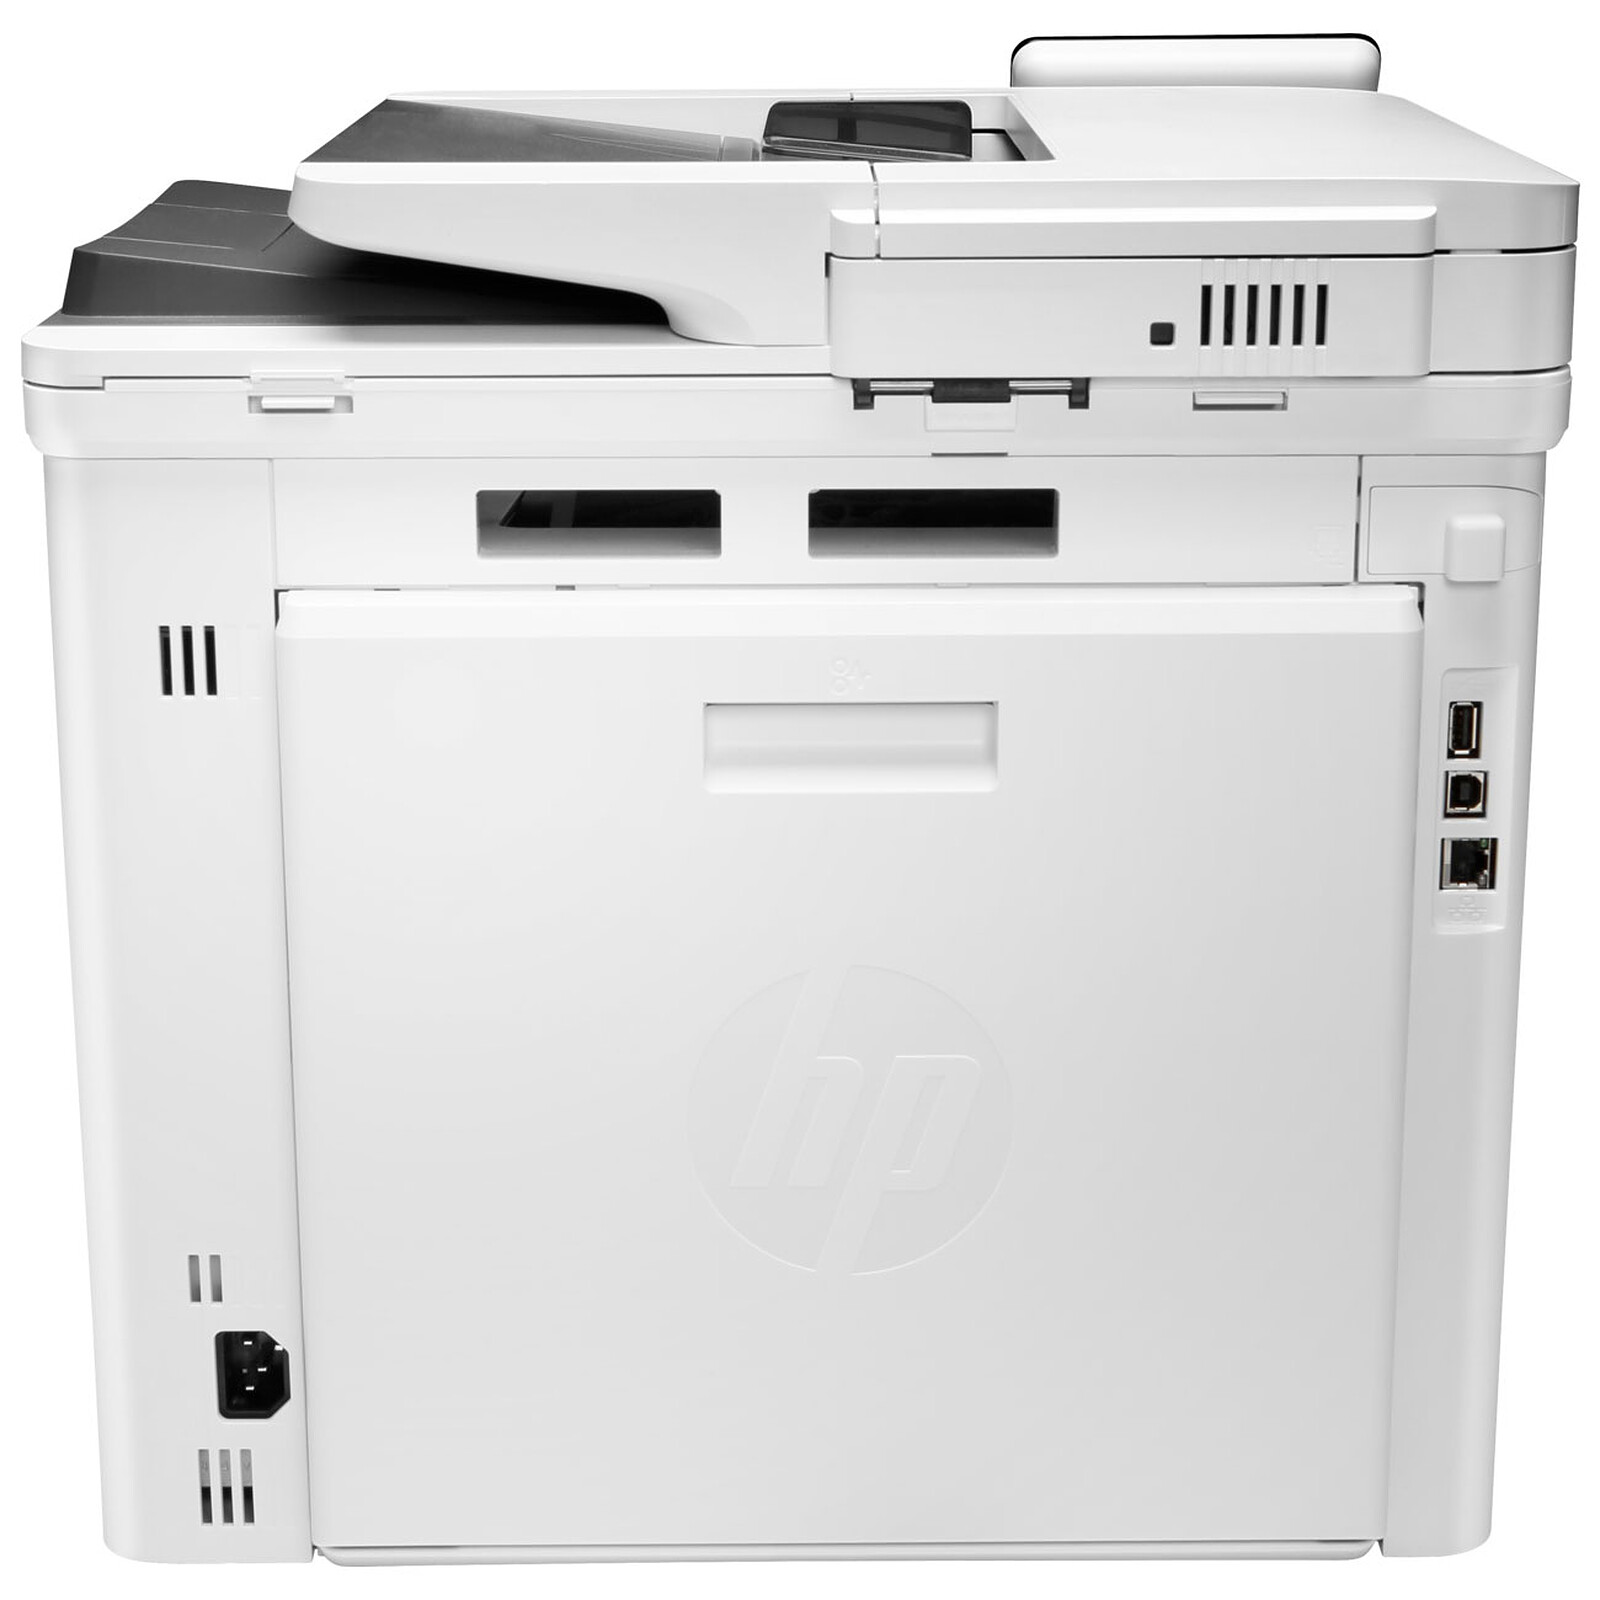 HP Color LaserJet Pro MFP M479FDW - All-in-one printer - LDLC 3